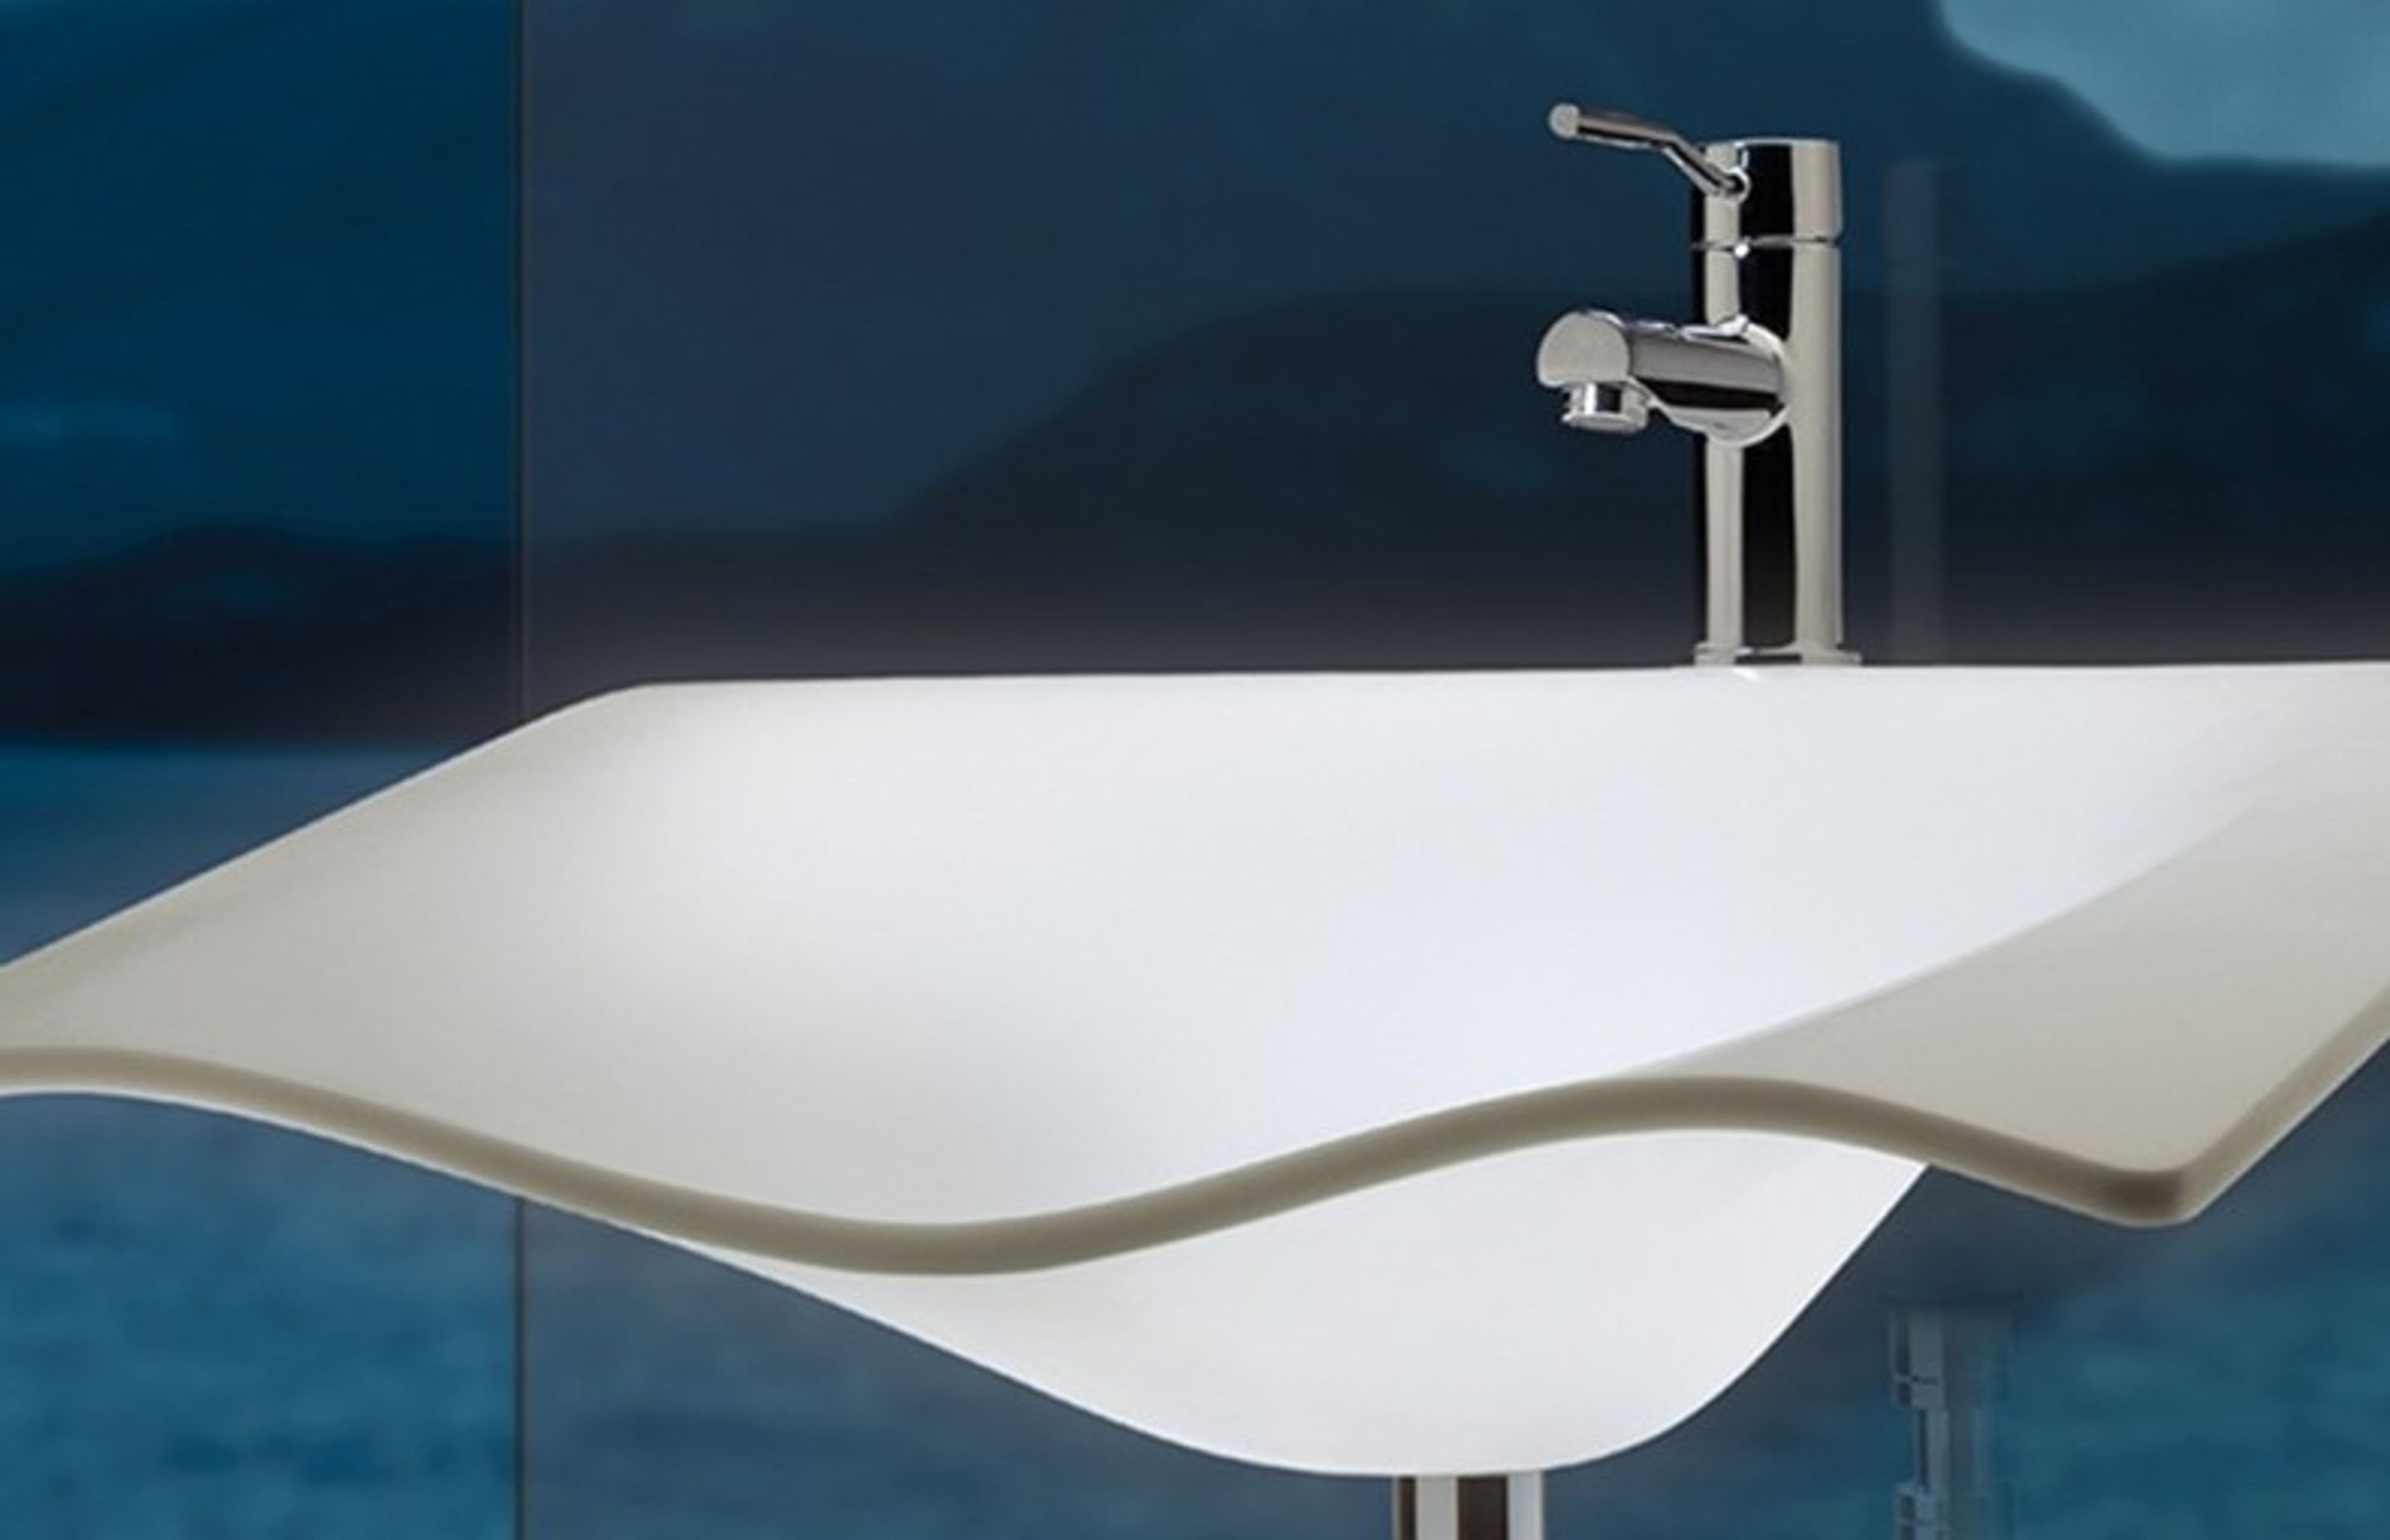 The Flight range of basins are designed for those that have limited mobility.